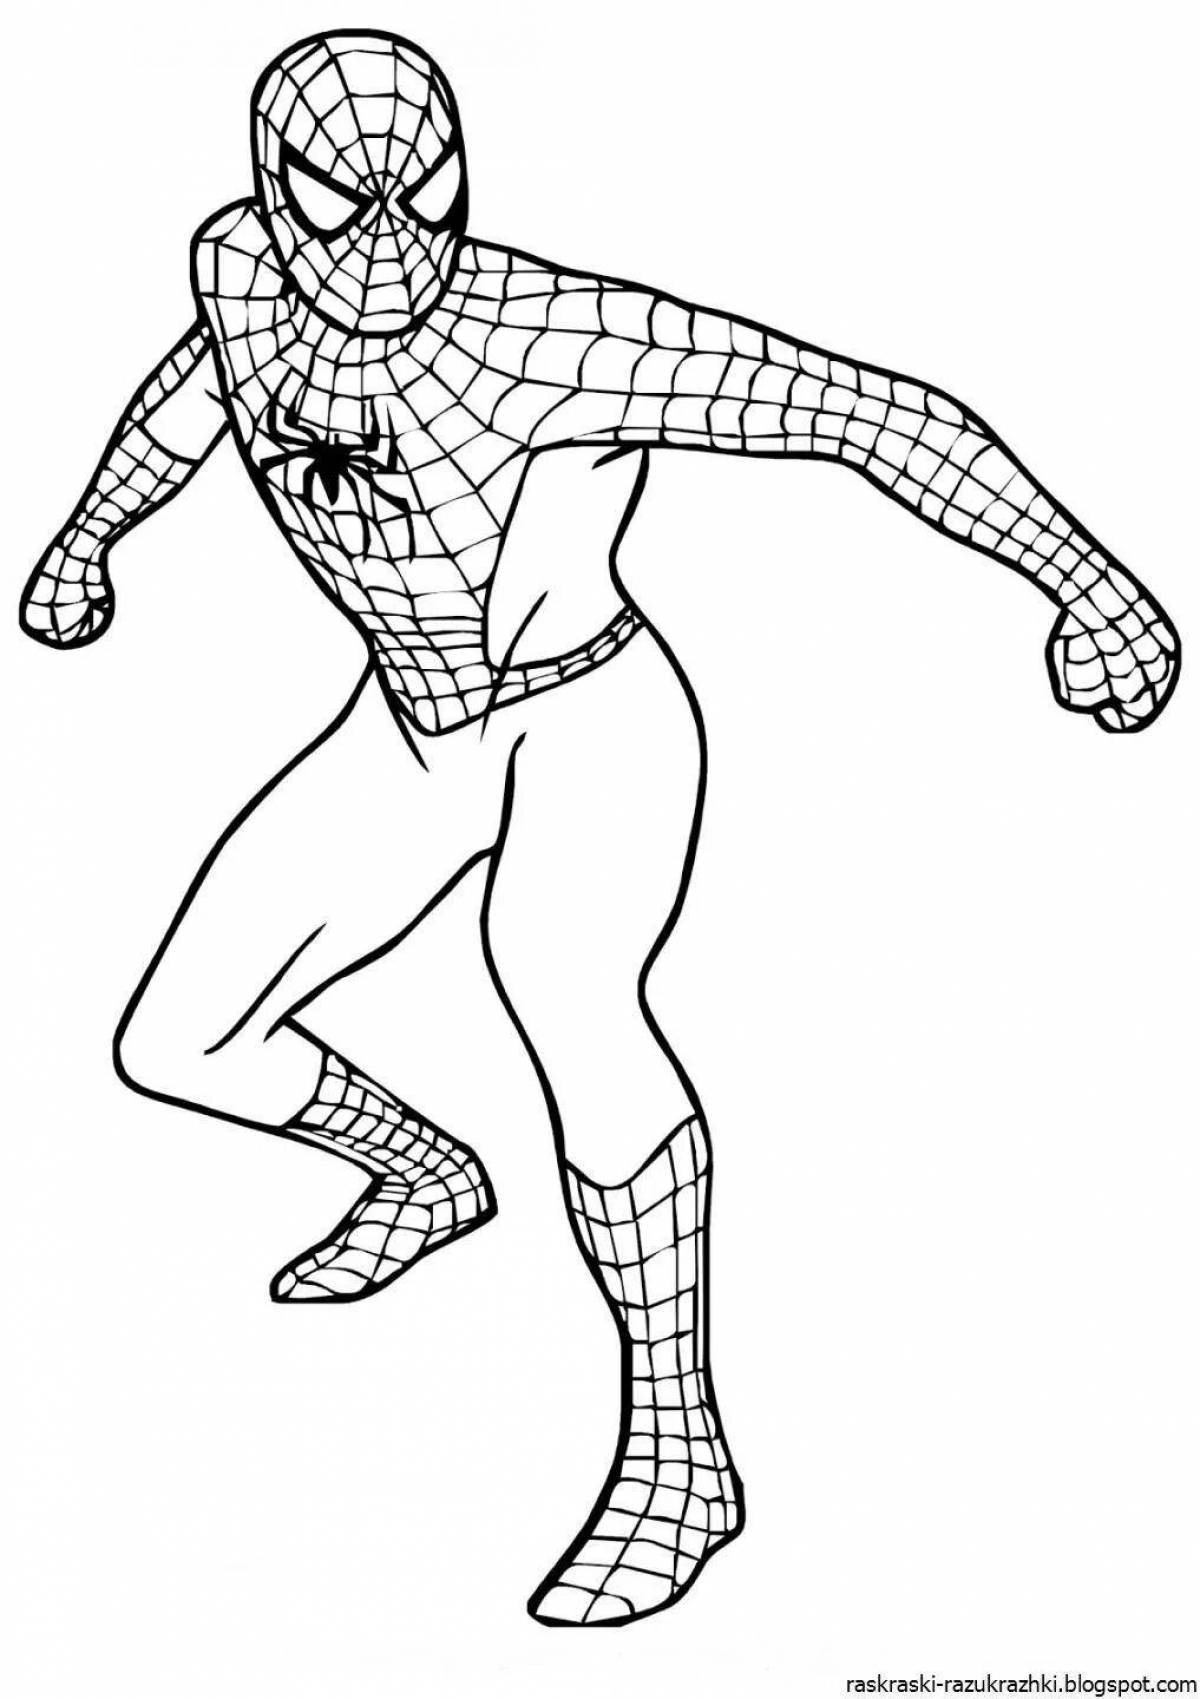 Amazing superhero coloring page for 4-5 year olds